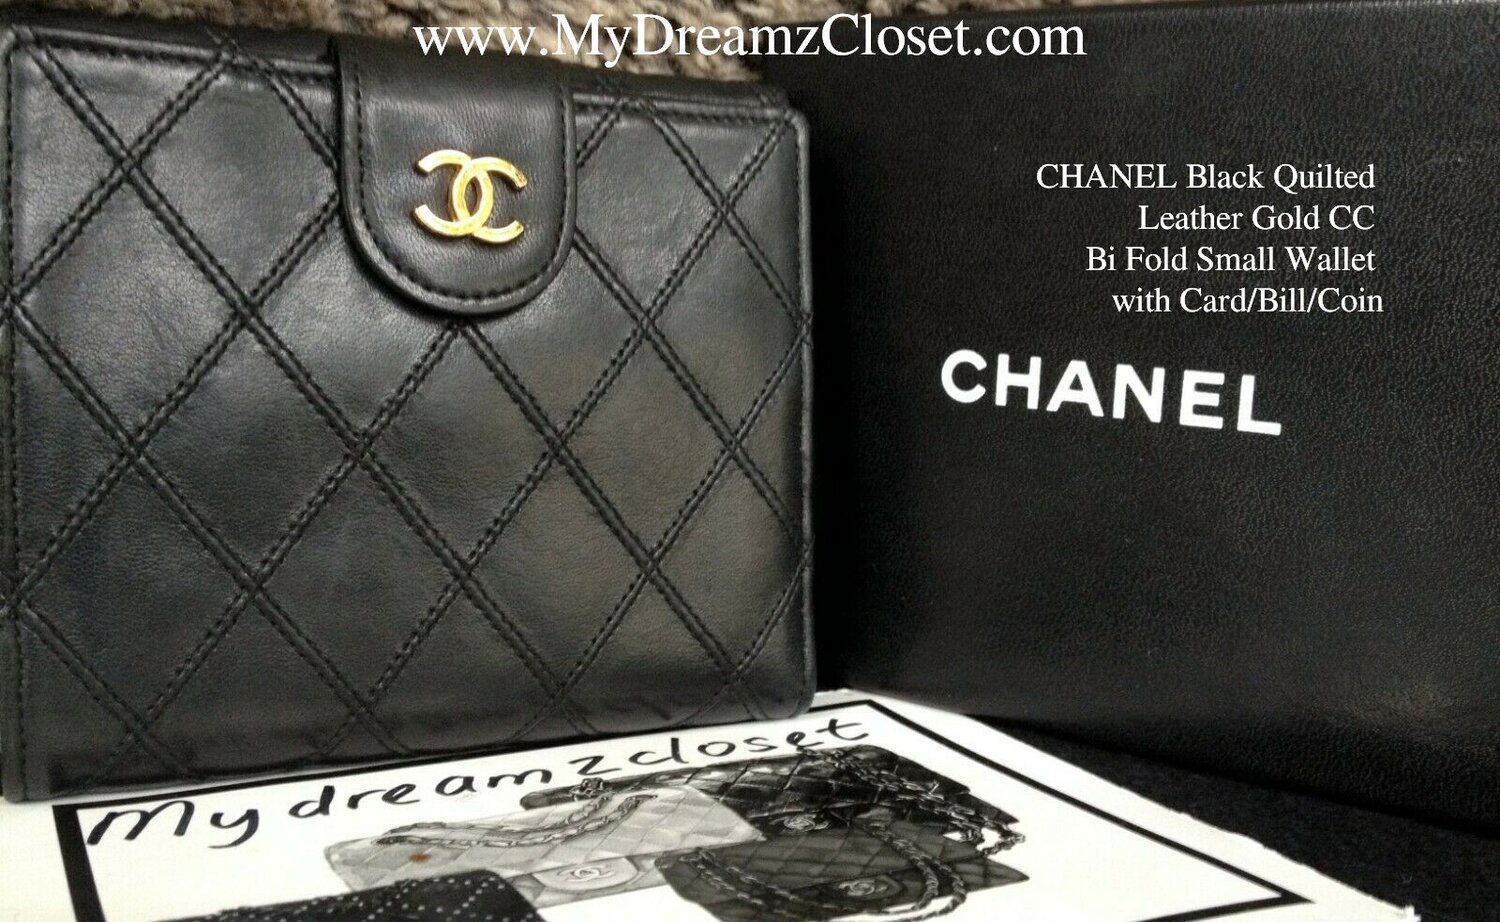 CHANEL Black Quilted Leather Gold CC Bi Fold Small Wallet with